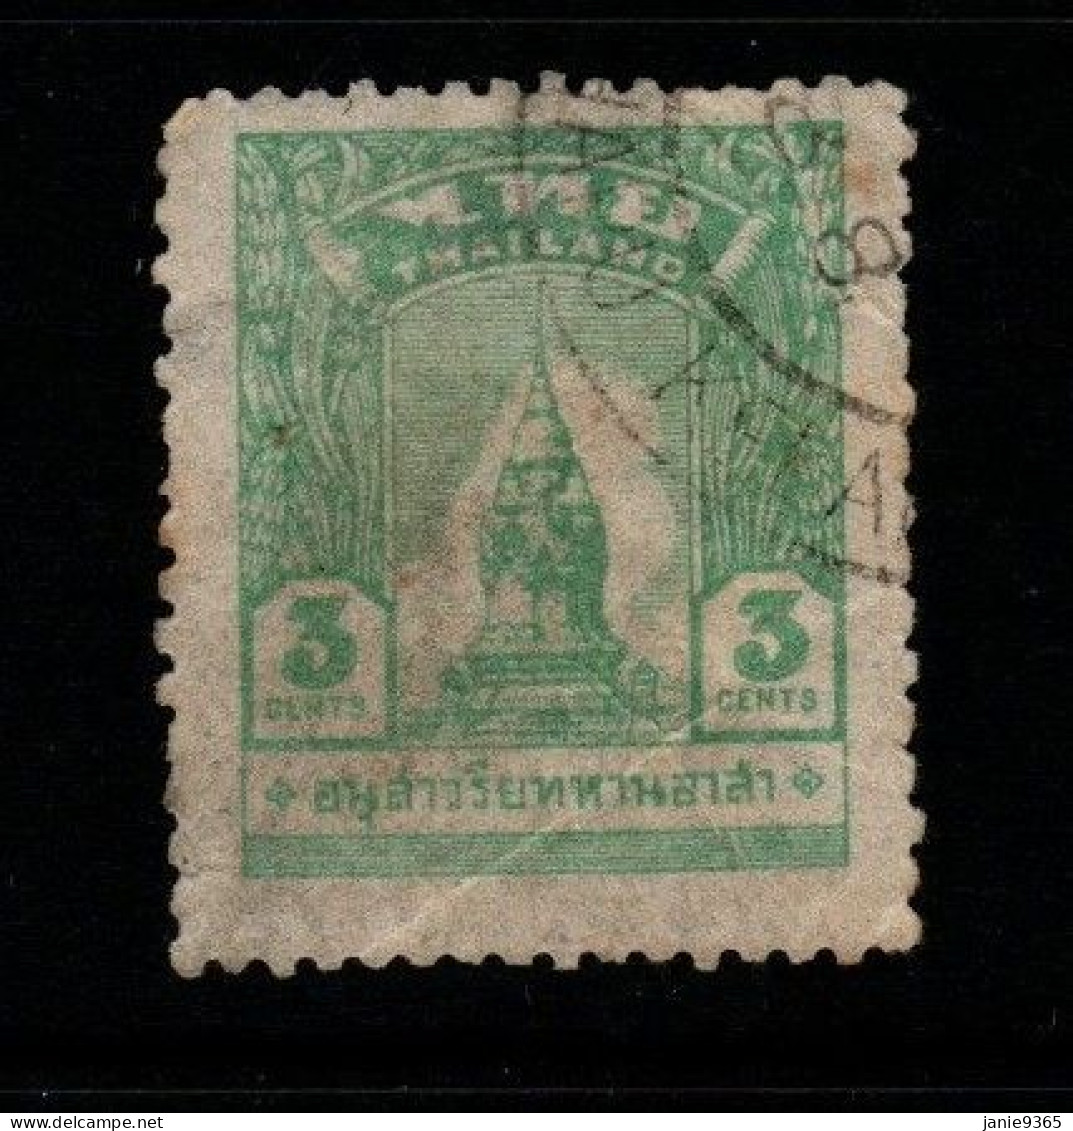 Thailand Cat 315  1944  Thai Occupation In Malay,3c Green,used - Tailandia